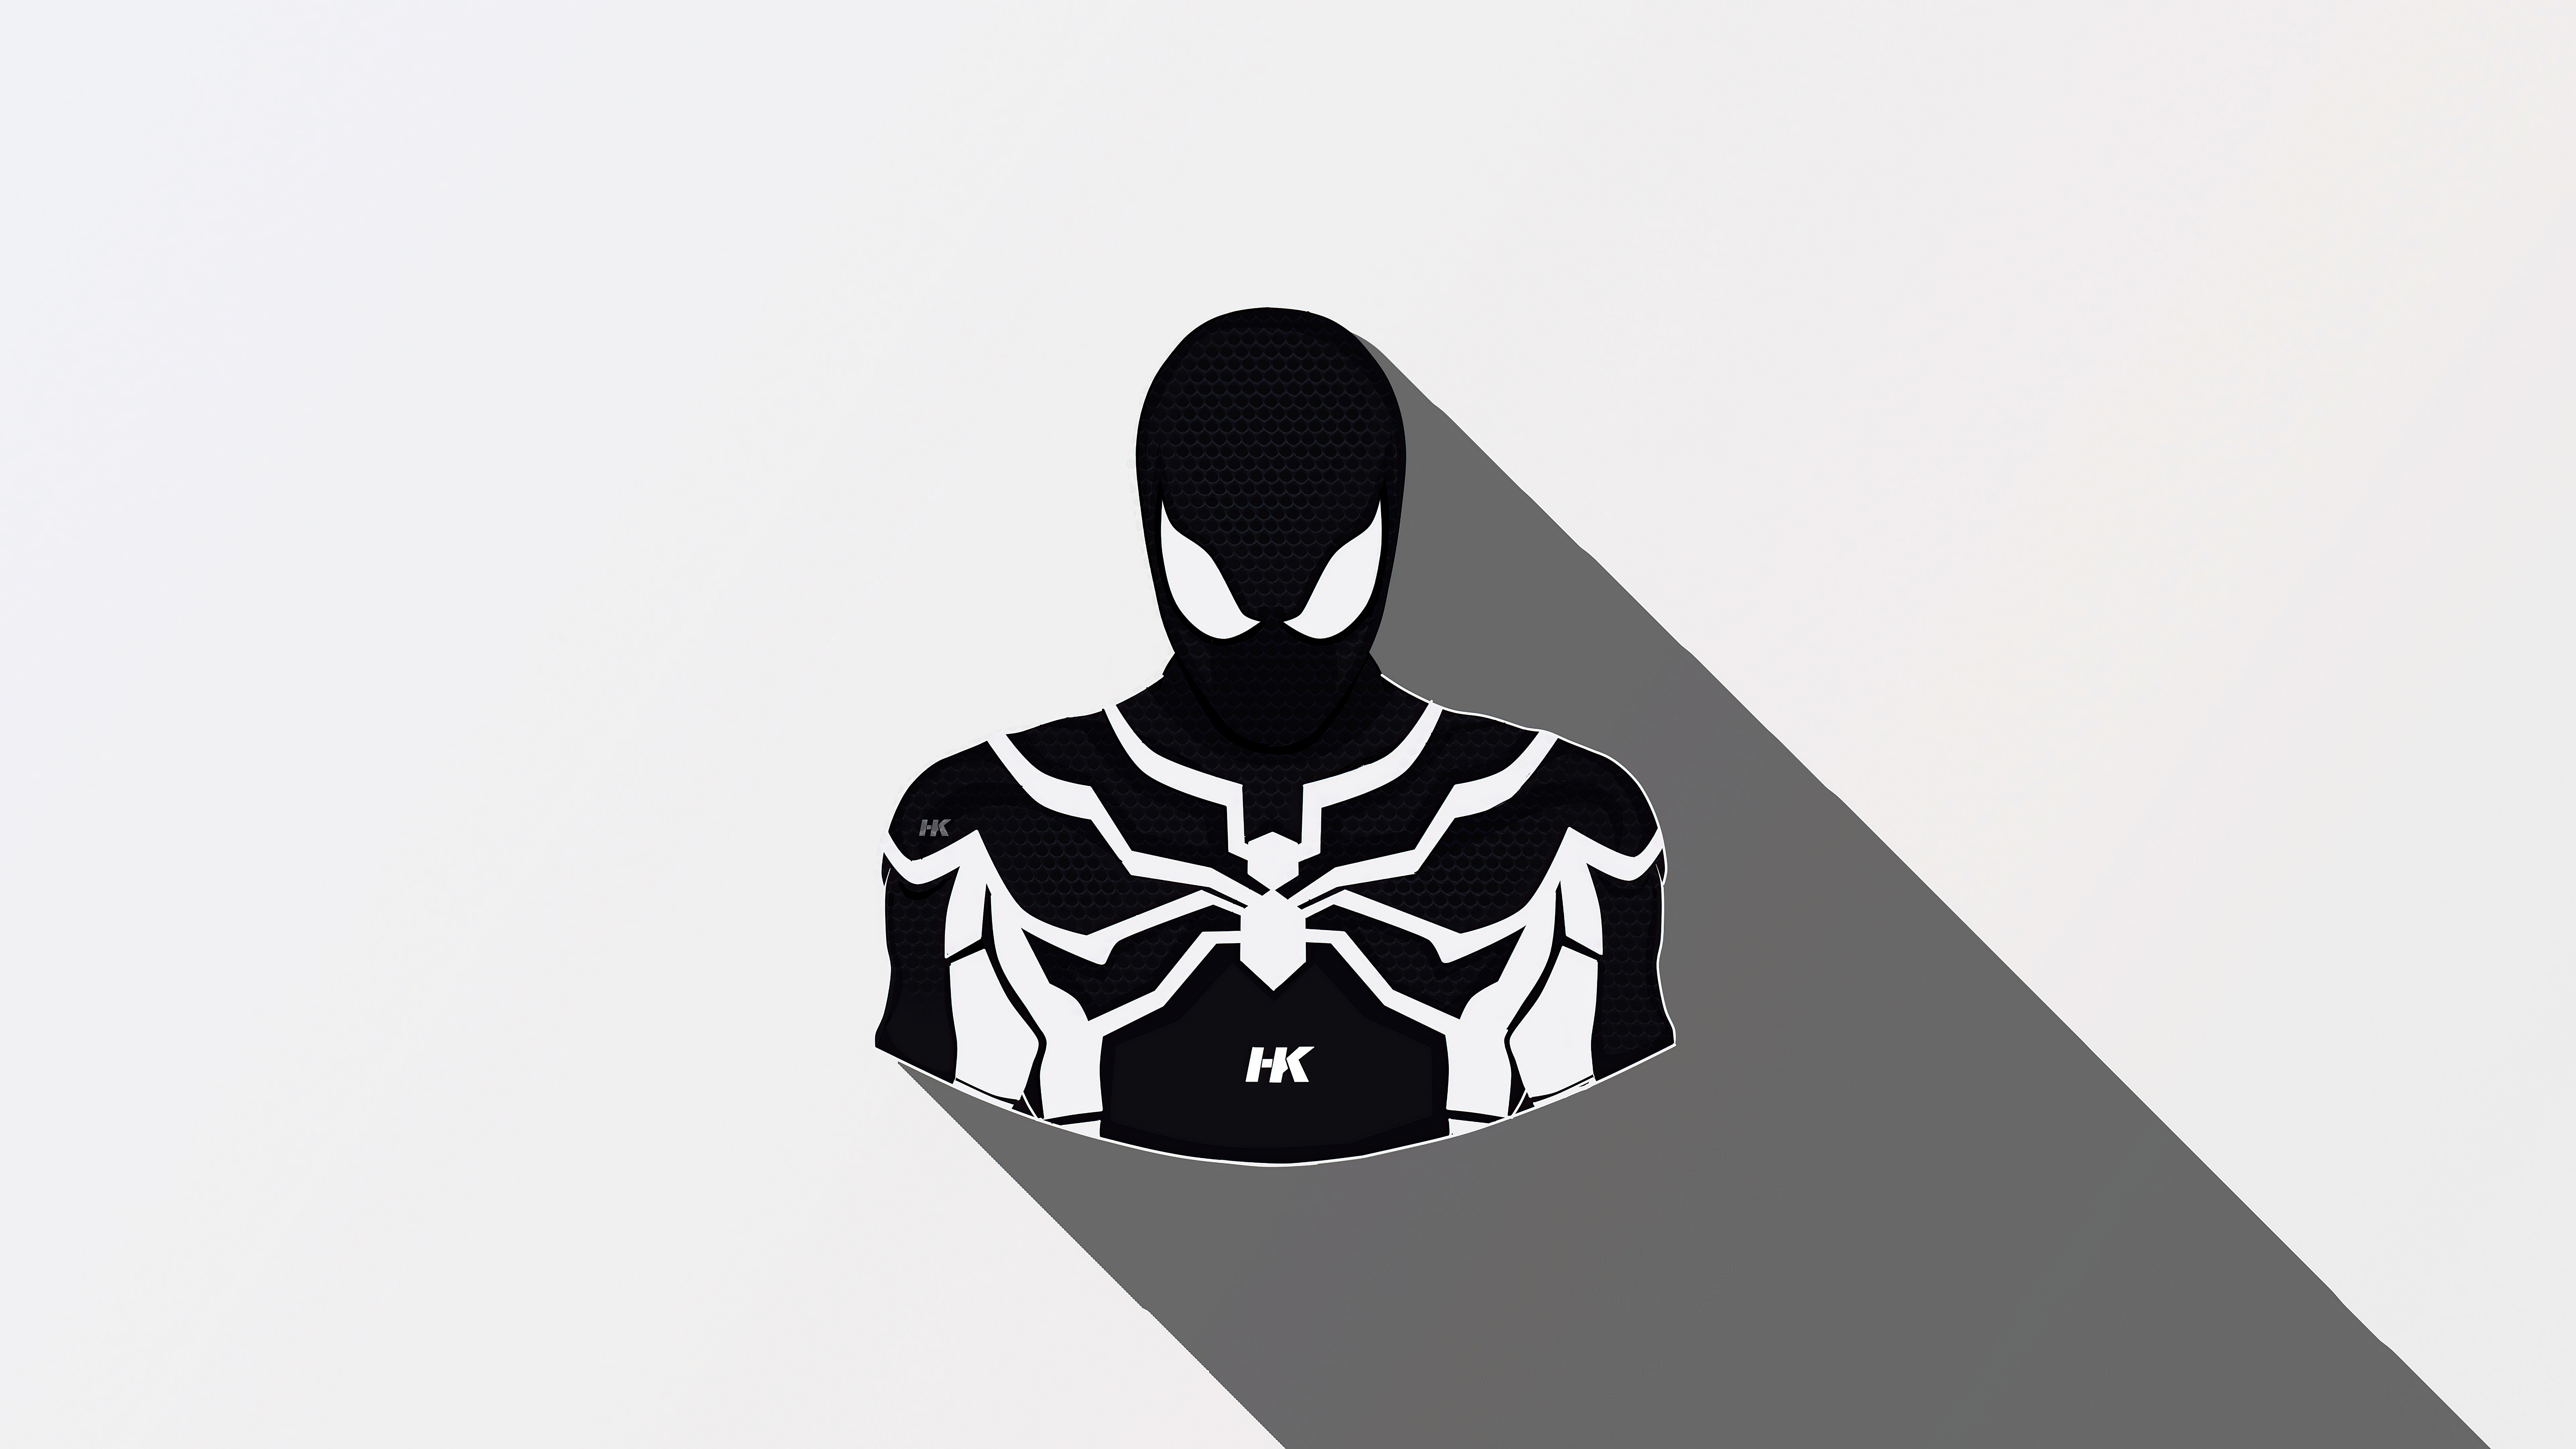 Spiderman Black Suit Minimal 8k, HD Superheroes, 4k Wallpaper, Image, Background, Photo and Picture